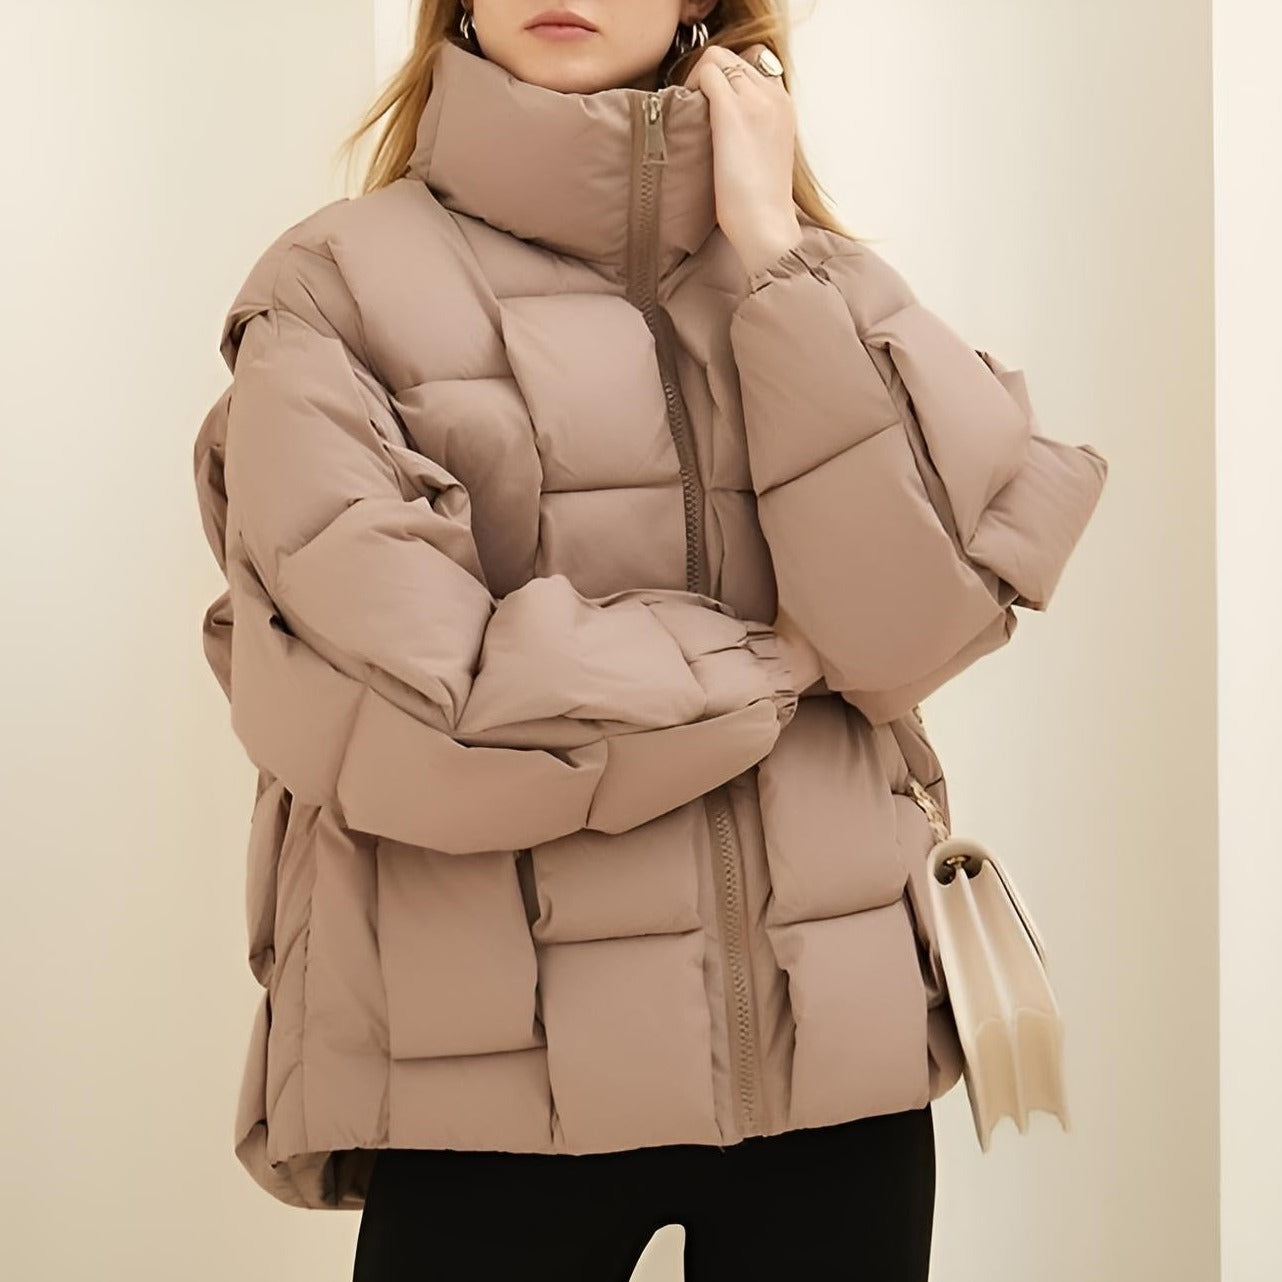 L'ATERIBÉLLE EDGY QUILTED PUFFER BY LILIAN-THOURAM™